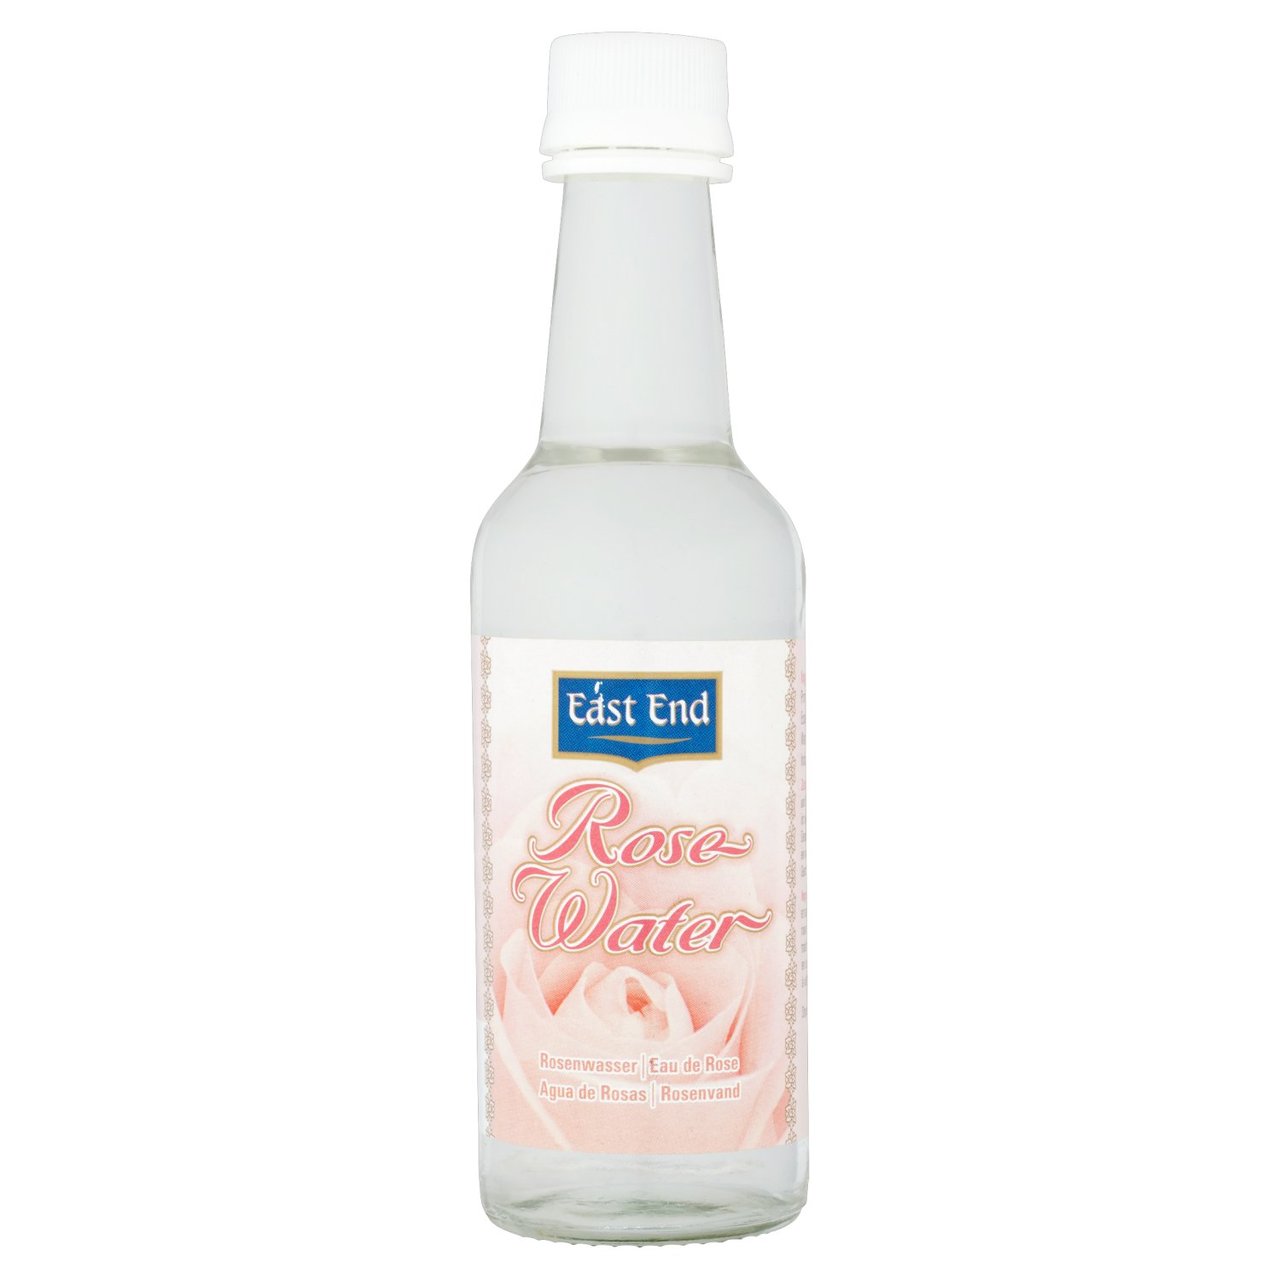 East End Rose Water 190g